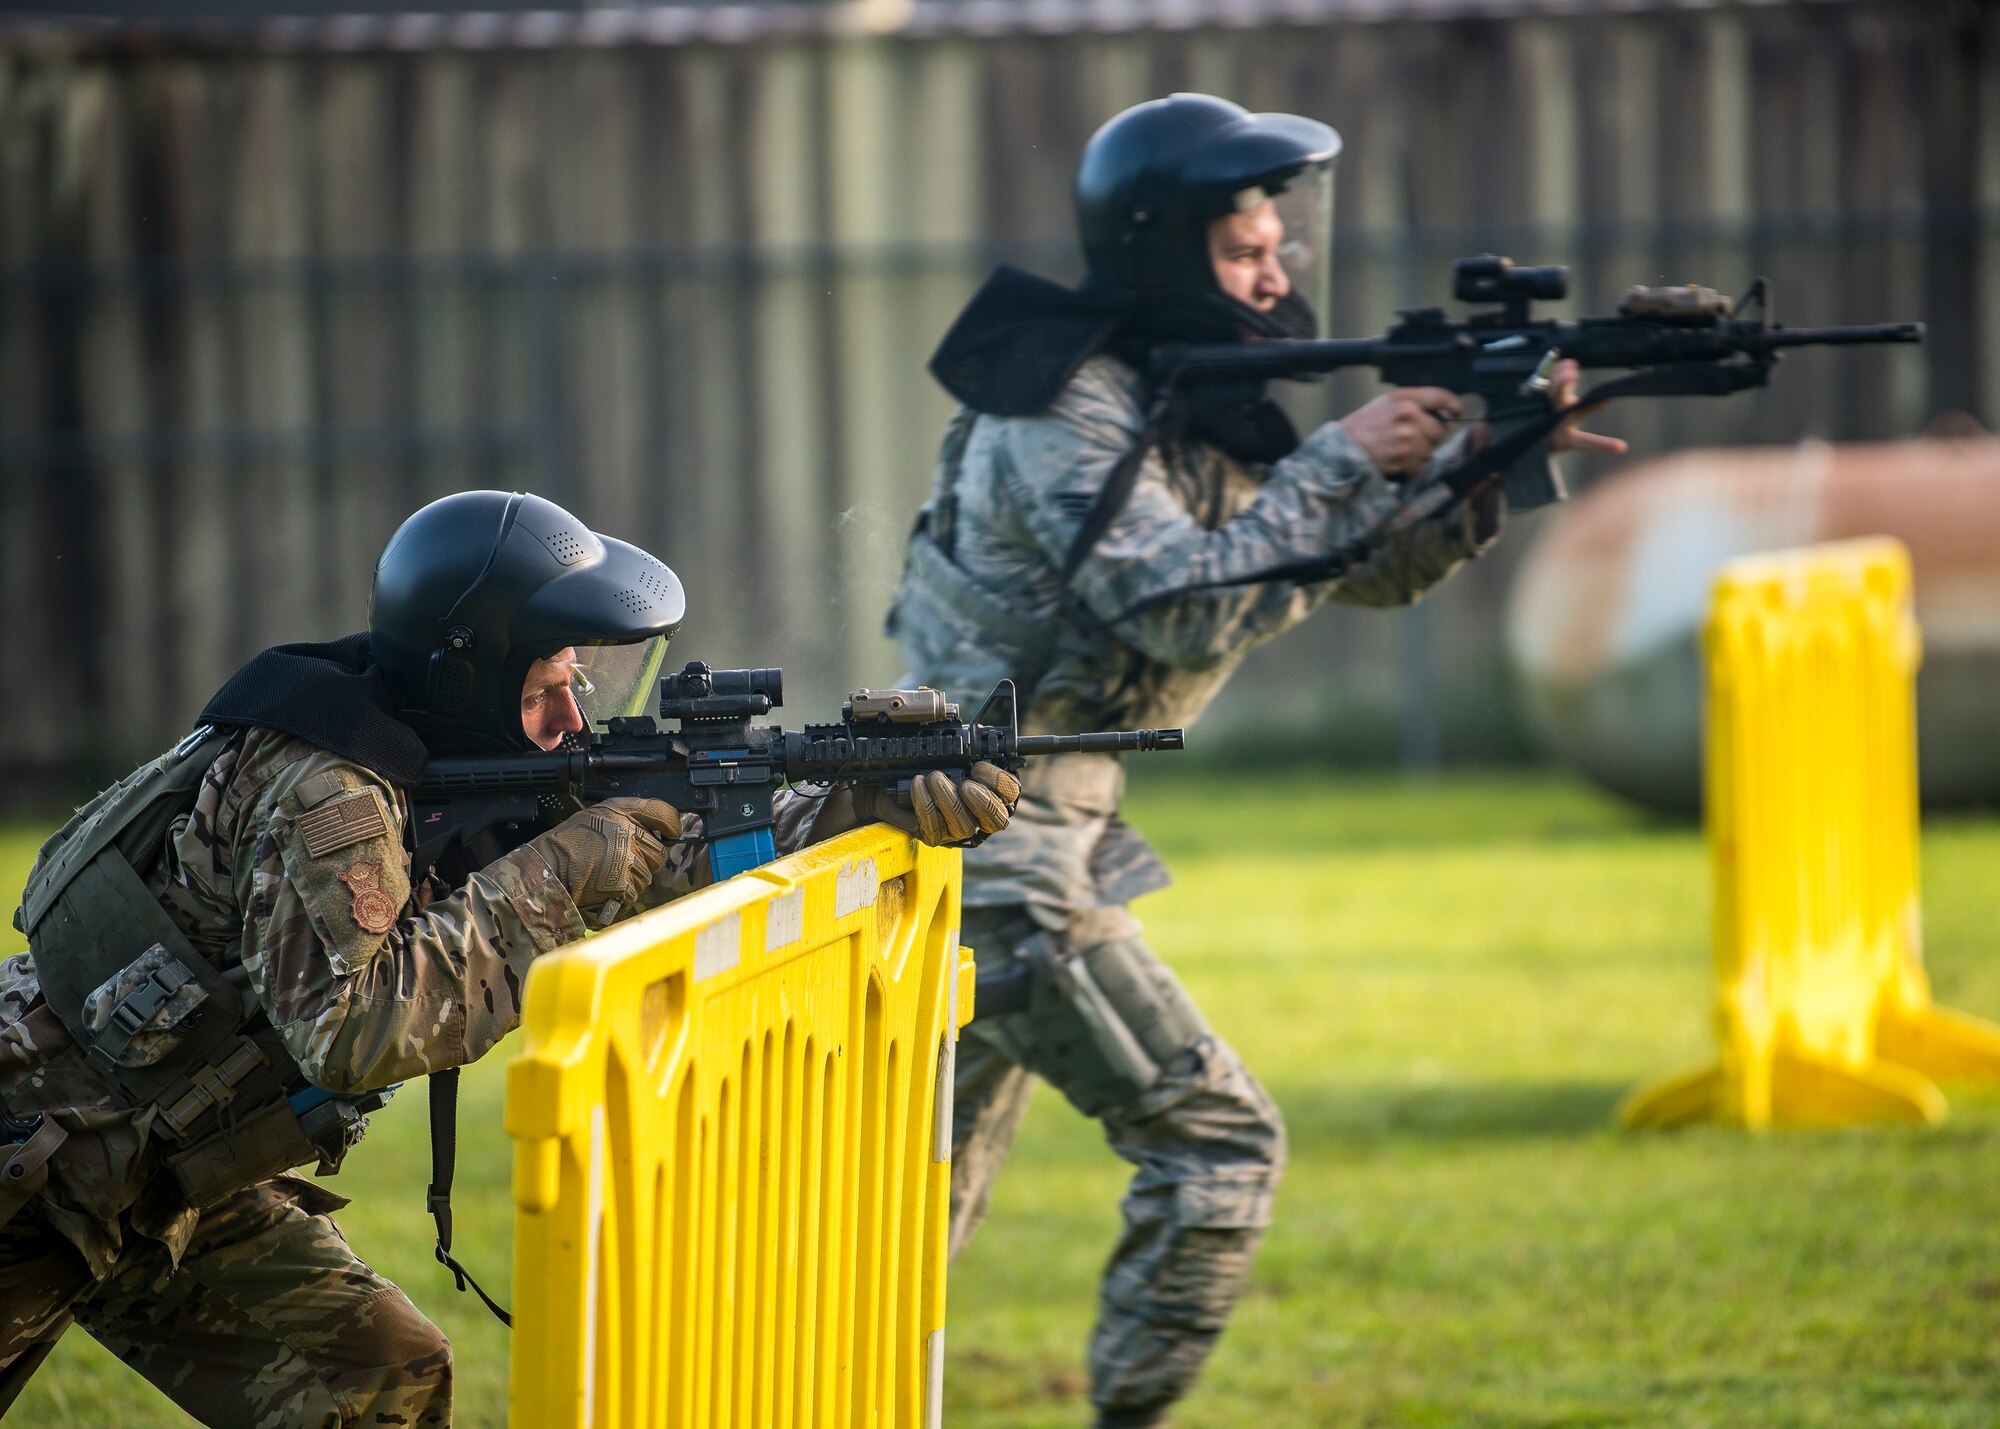 Staff Sgt. Christian Bertram, left, 23d Security Forces Squadron (SFS) patrolman, shoots cover fire for Senior Airman Kyle Macintyre, 23d SFS patrolman during a training exercise, July 15, 2019, at Moody Air Force Base, Ga. The “Shoot, move, communicate” training exercise put participants through practice maneuvers taking turns providing cover fire while others advanced on the enemy. Airmen learned how to shoot, move and communicate to build confidence in themselves, their wingmen and with their weapons. (U.S. Air Force photo by Airman 1st Class Eugene Oliver)